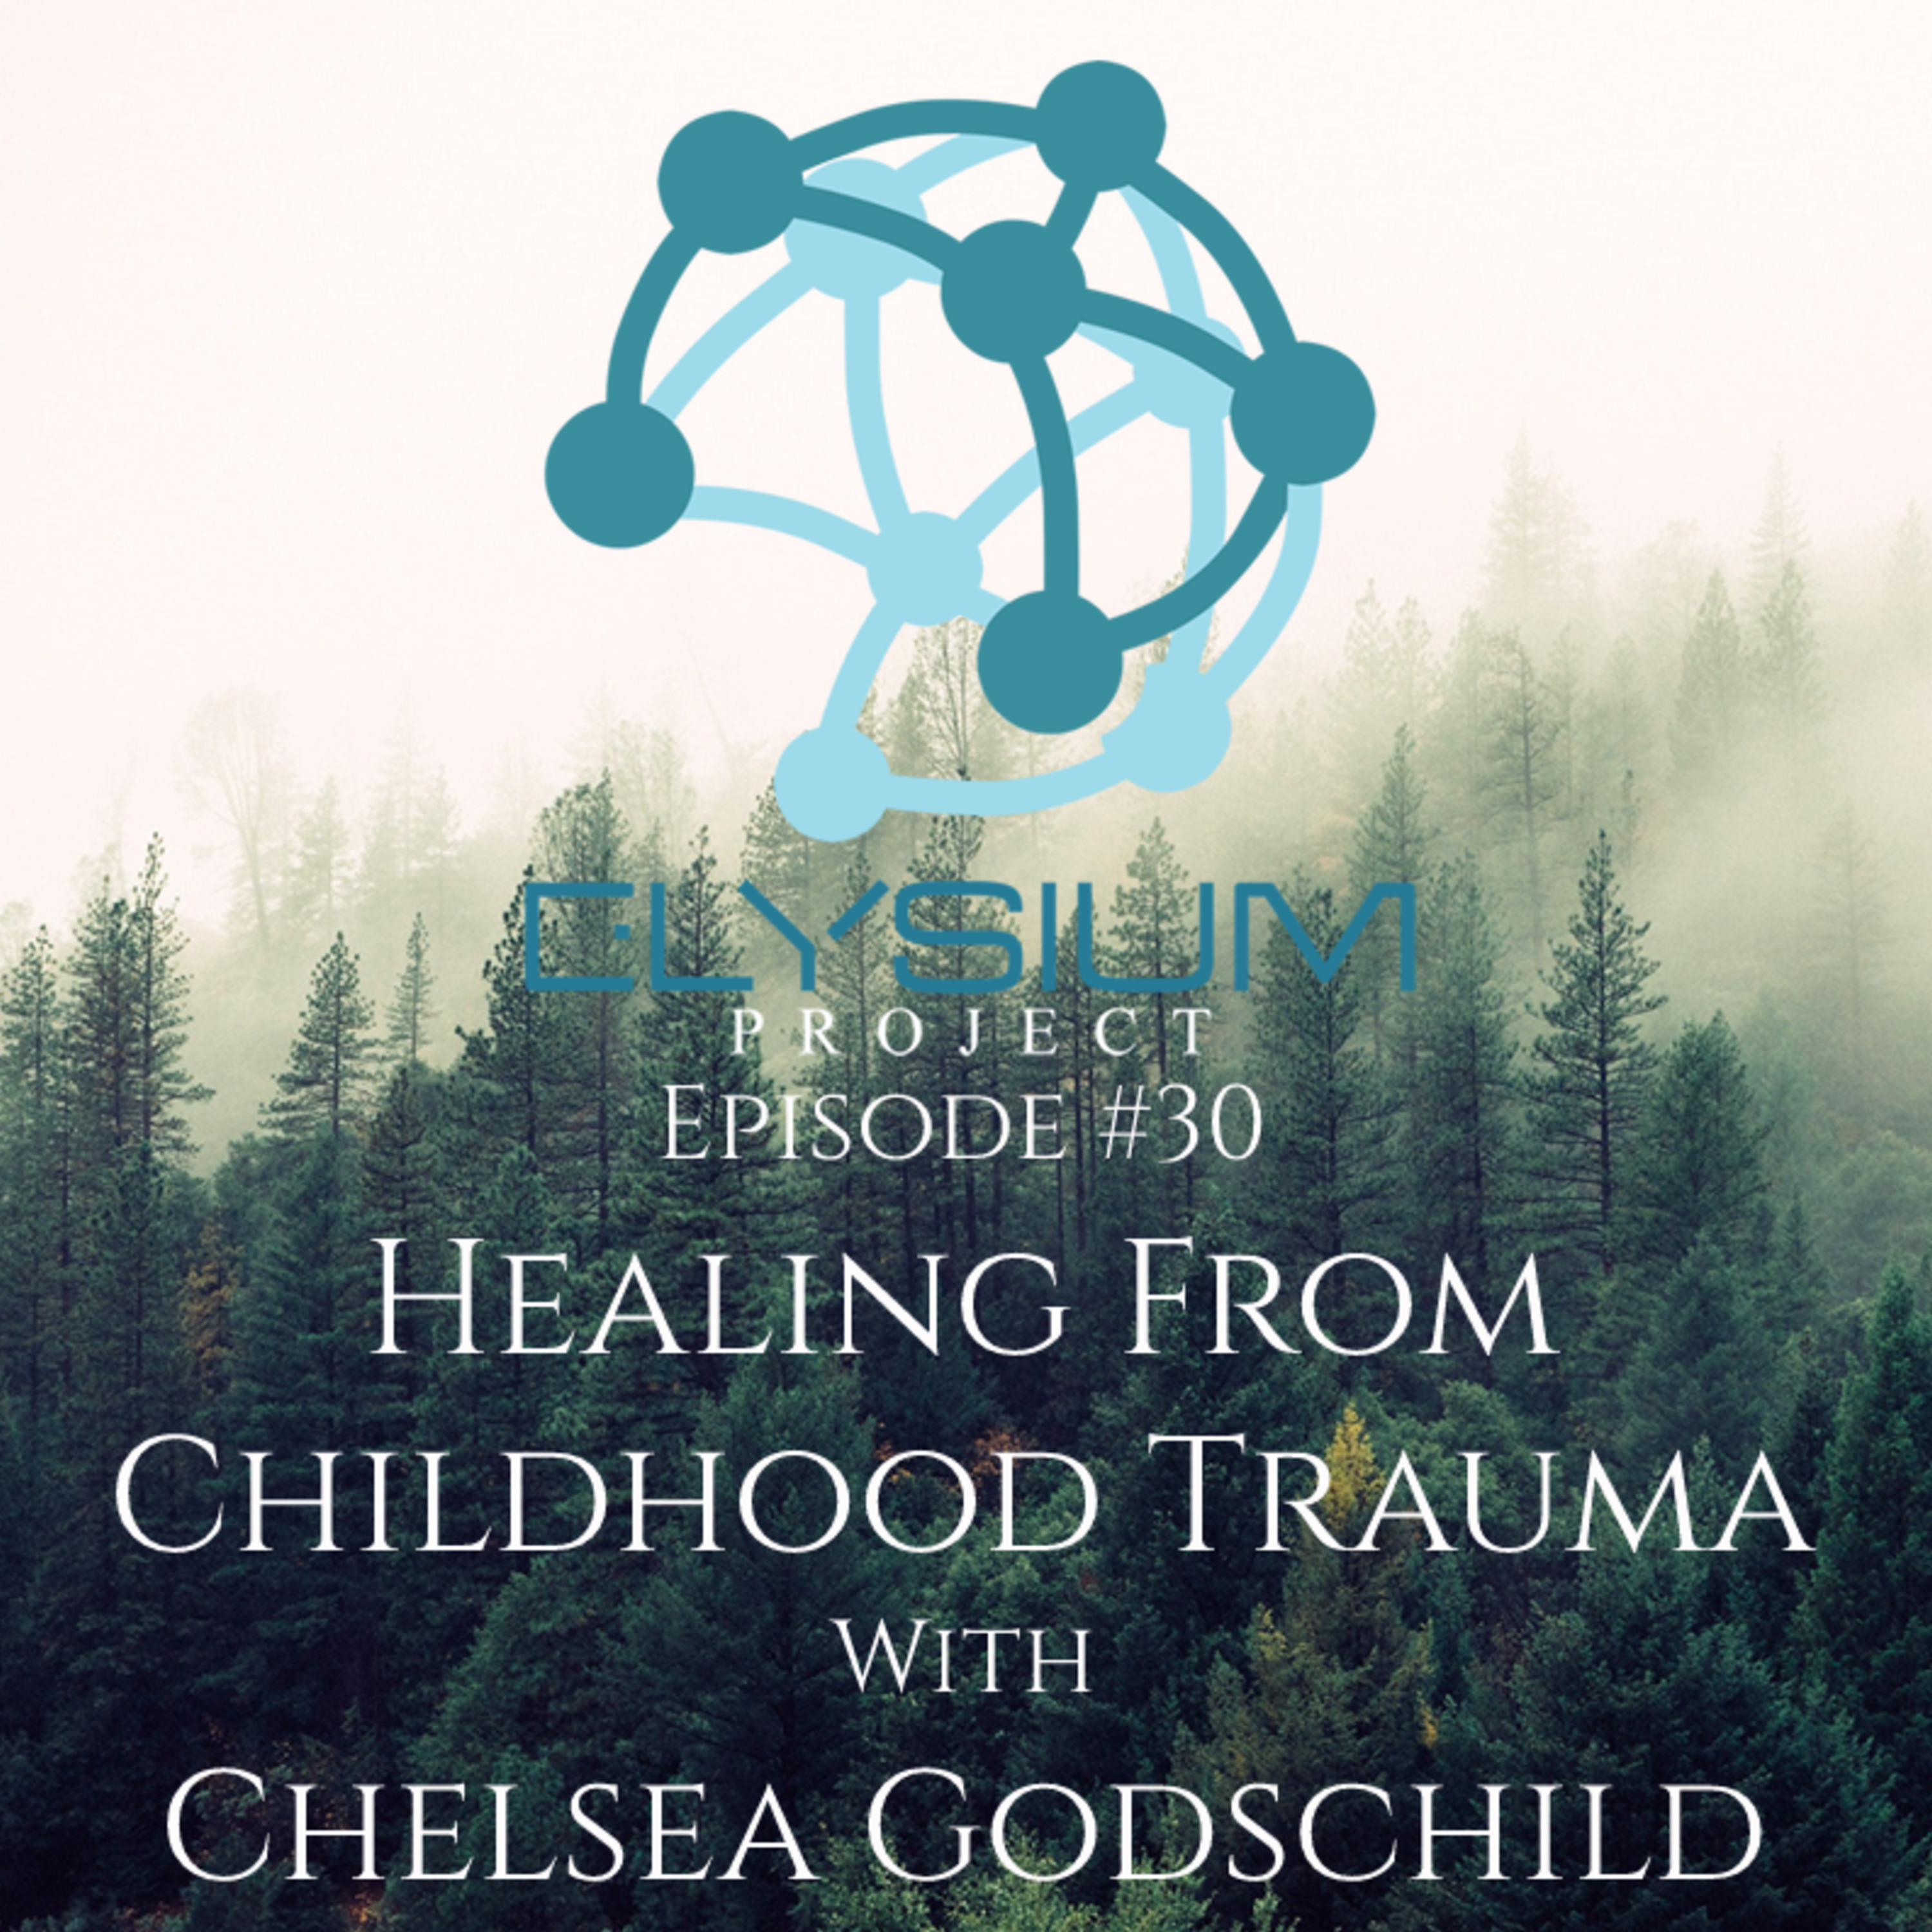 Episode 30: Healing From Childhood Trauma with Chelsea Godschild